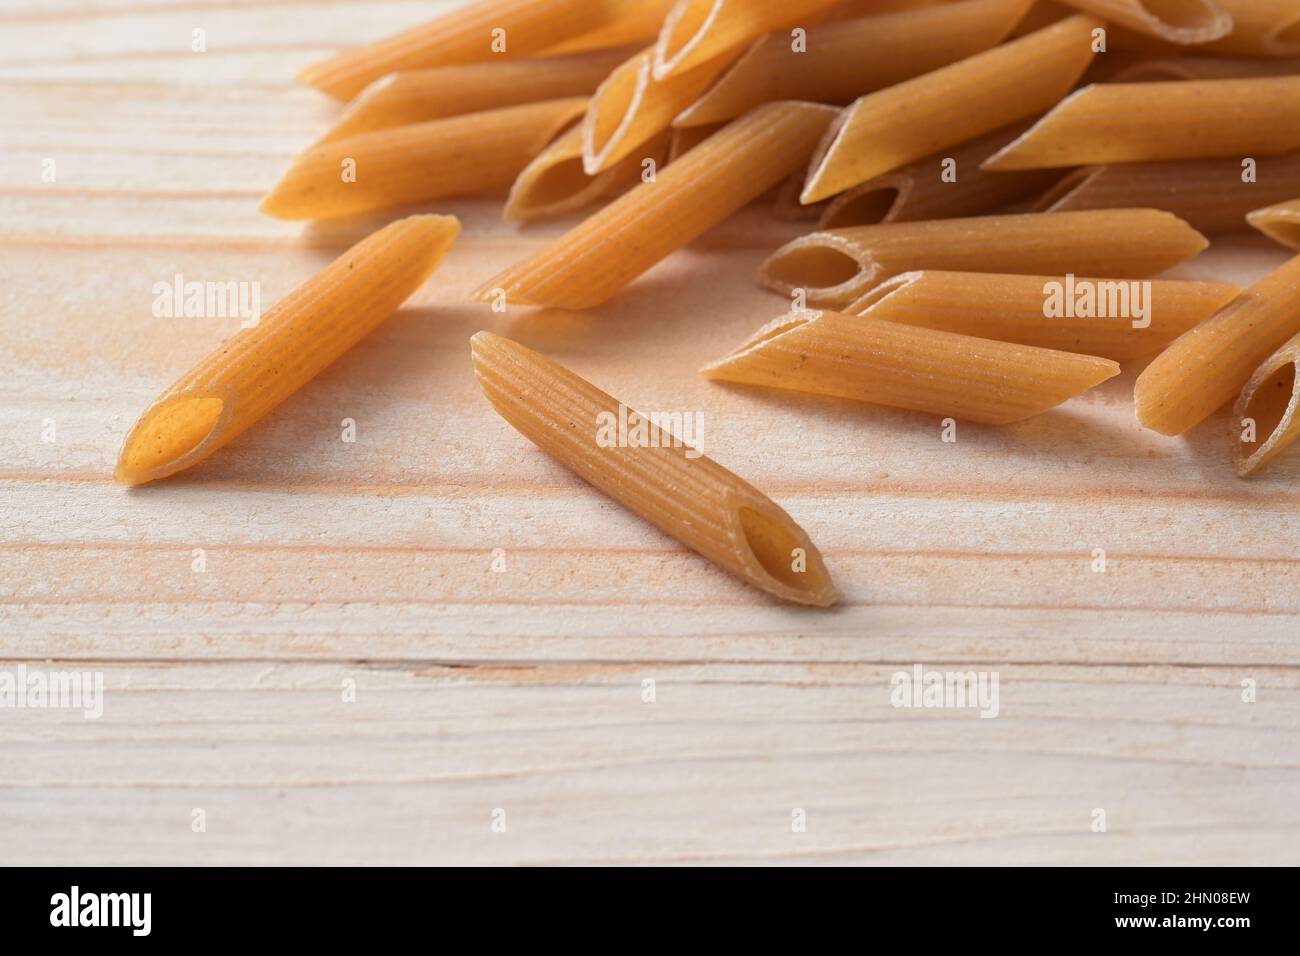 Wholegrain noodles, healthy pasta alternative with more fiber, minerals, protein and B vitamins, light wooden table, copy space, selected focus, very Stock Photo